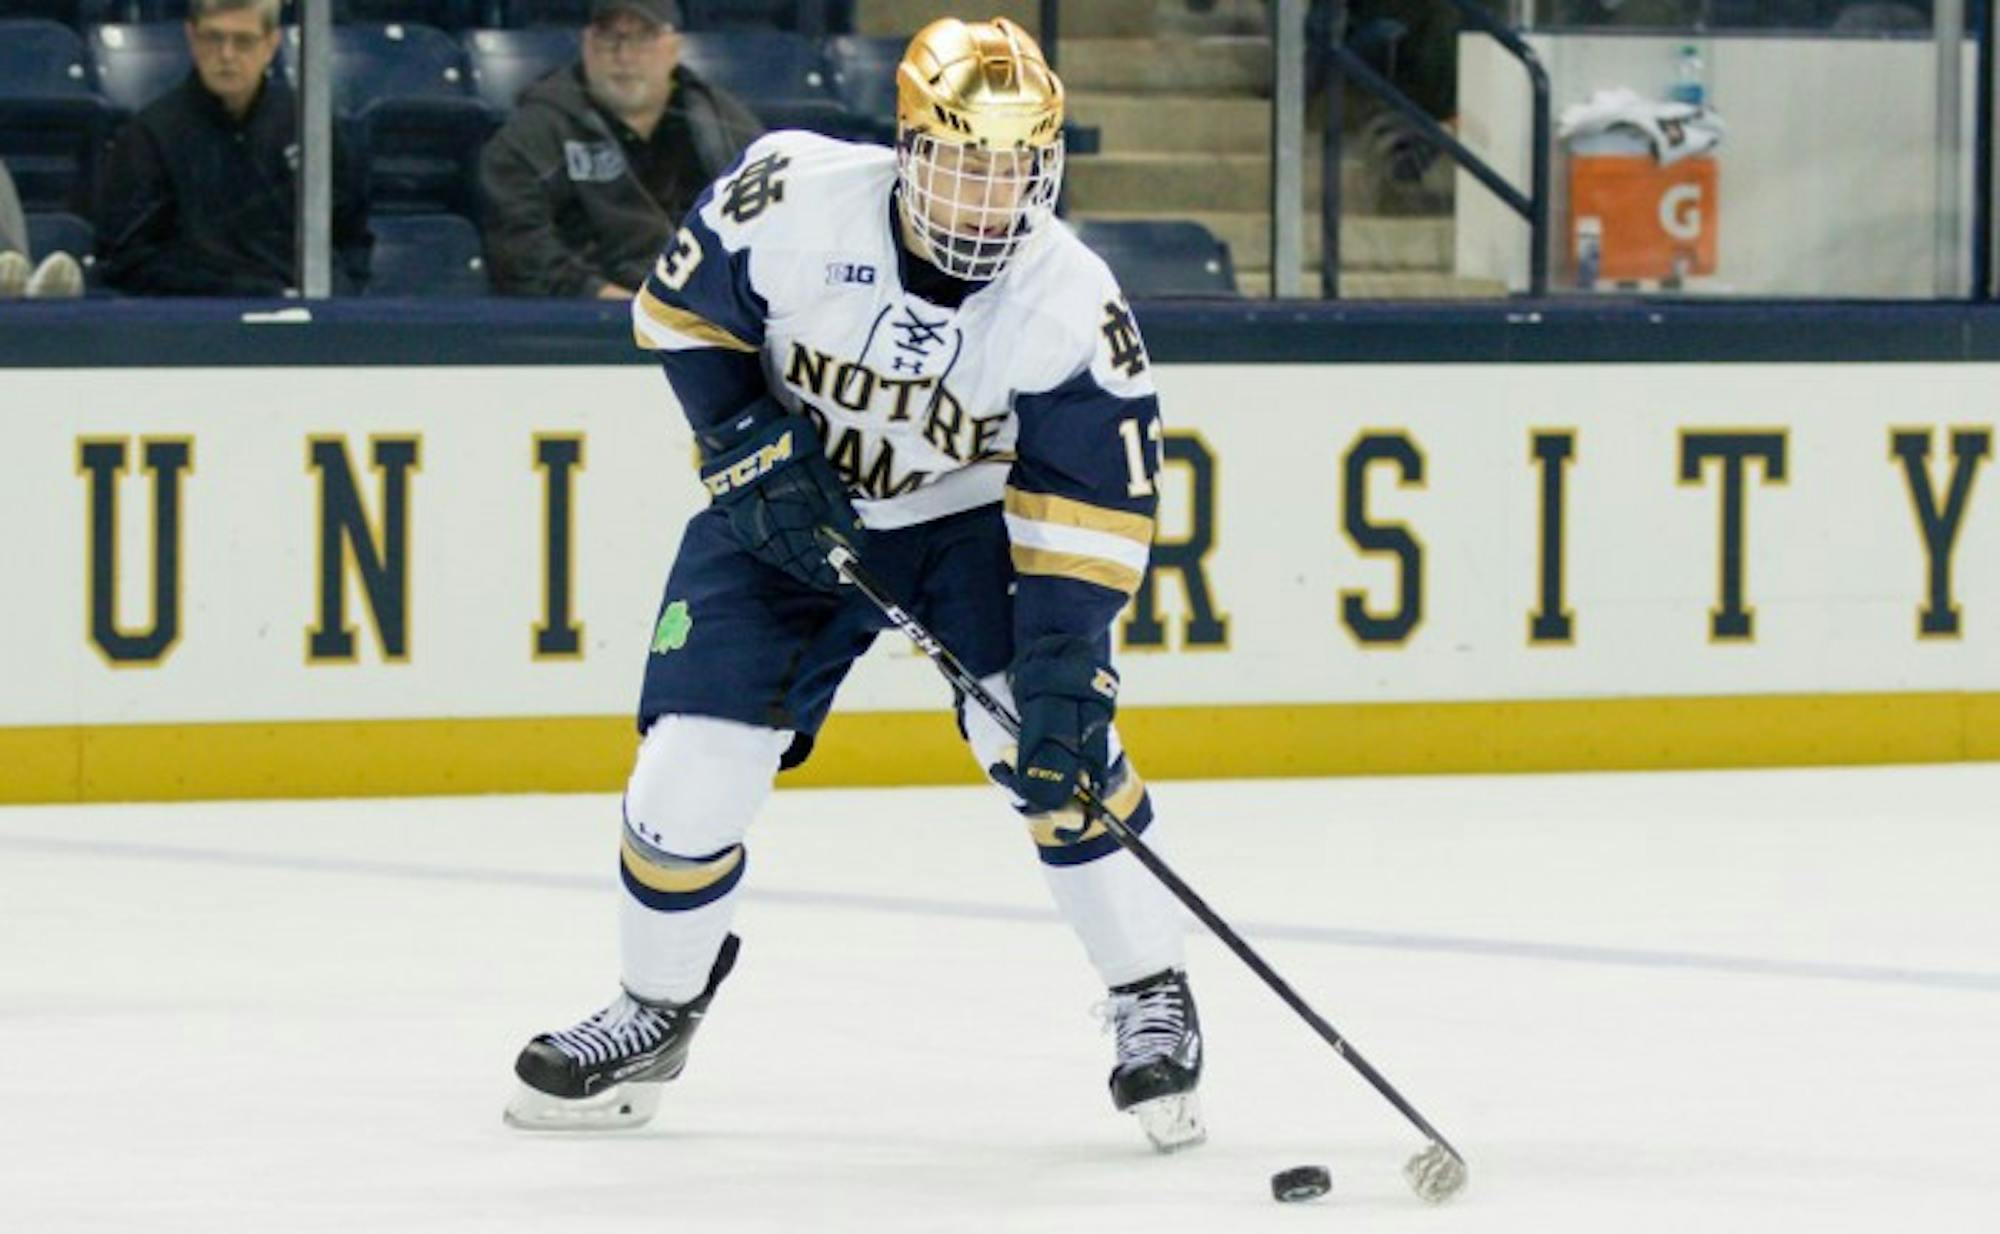 Irish freshman forward Colin Theisen skates with the puck during Notre Dame's 4-3 win over USNTDP on Sunday at Compton Family Ice Arena.